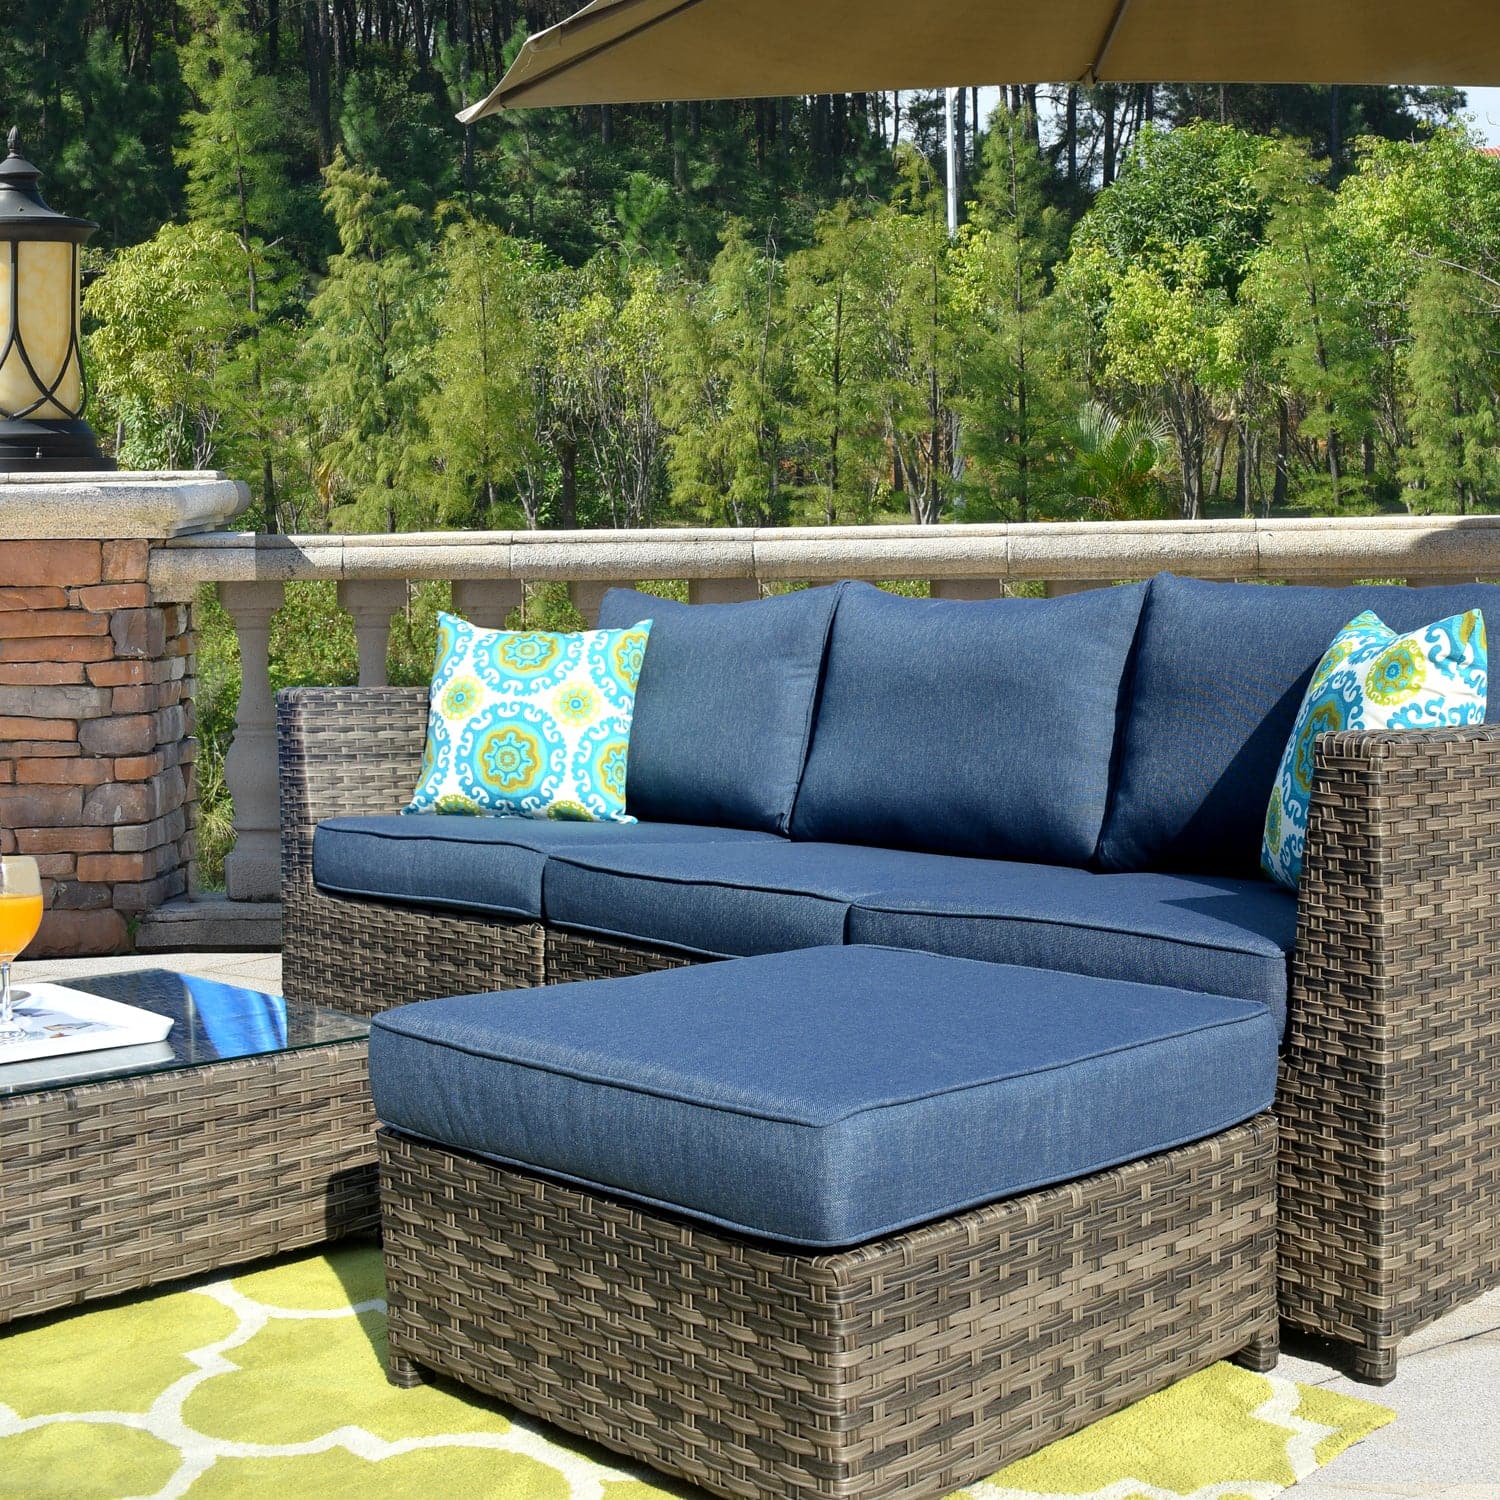 Ovios Patio Furniture Set Bigger Size 12-Piece, King Series, No Assembly Required